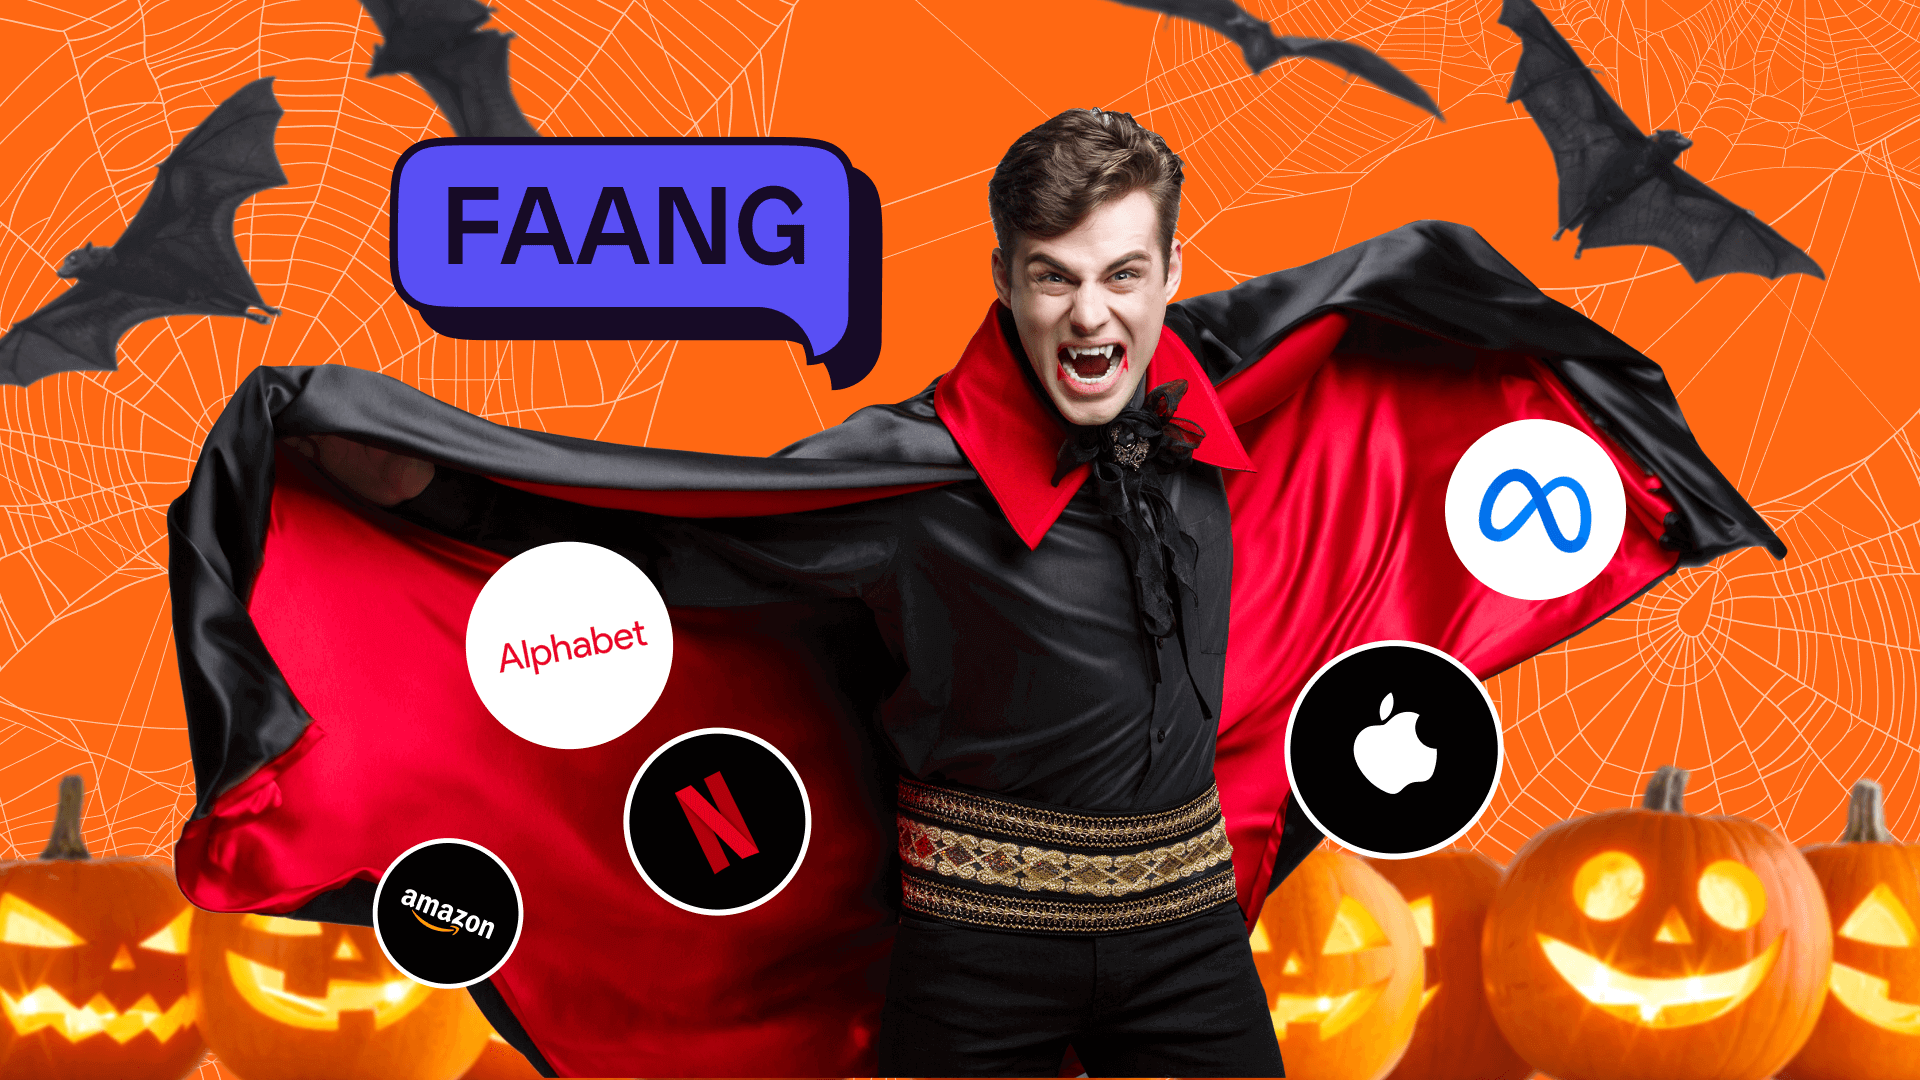 Vampire with fangs explaining what FAANG stocks are